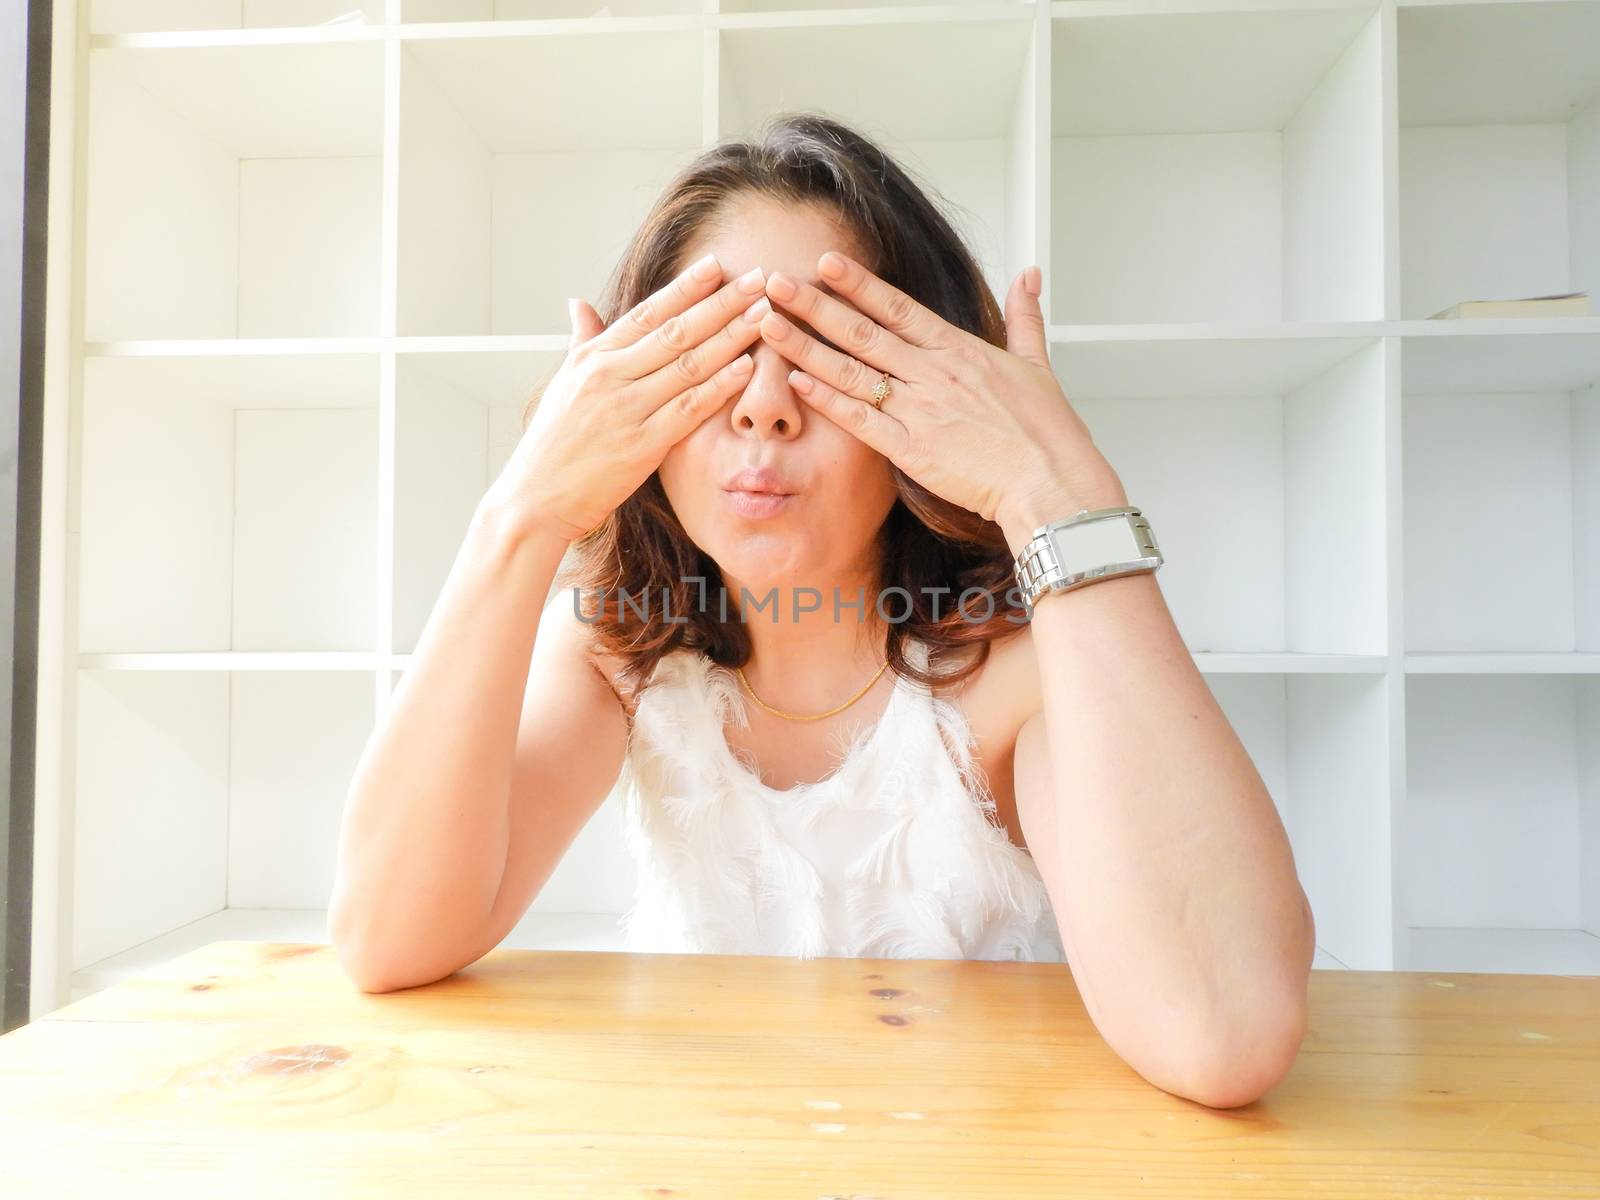 Beautiful woman closed her eyes against white background and the wood table.
